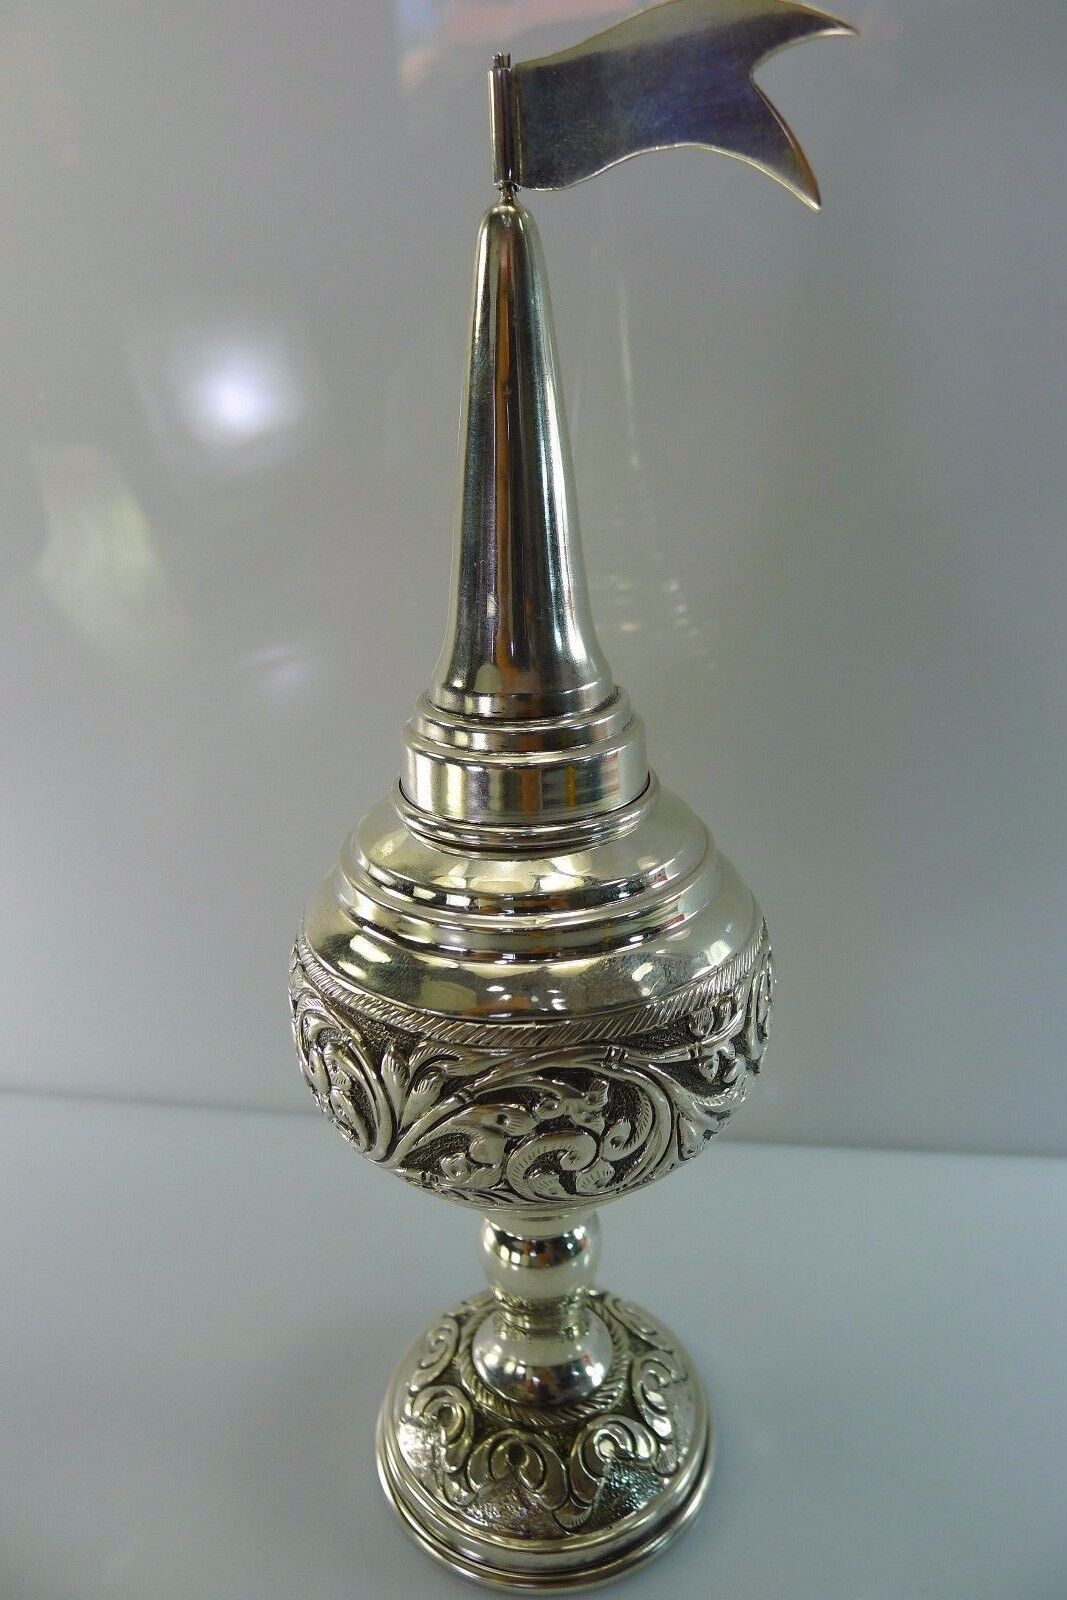 VINTAGE SOLID 925 SILVER JUDAICA BESAMIM SPICE TOWER WITH A RAISED DECORATION